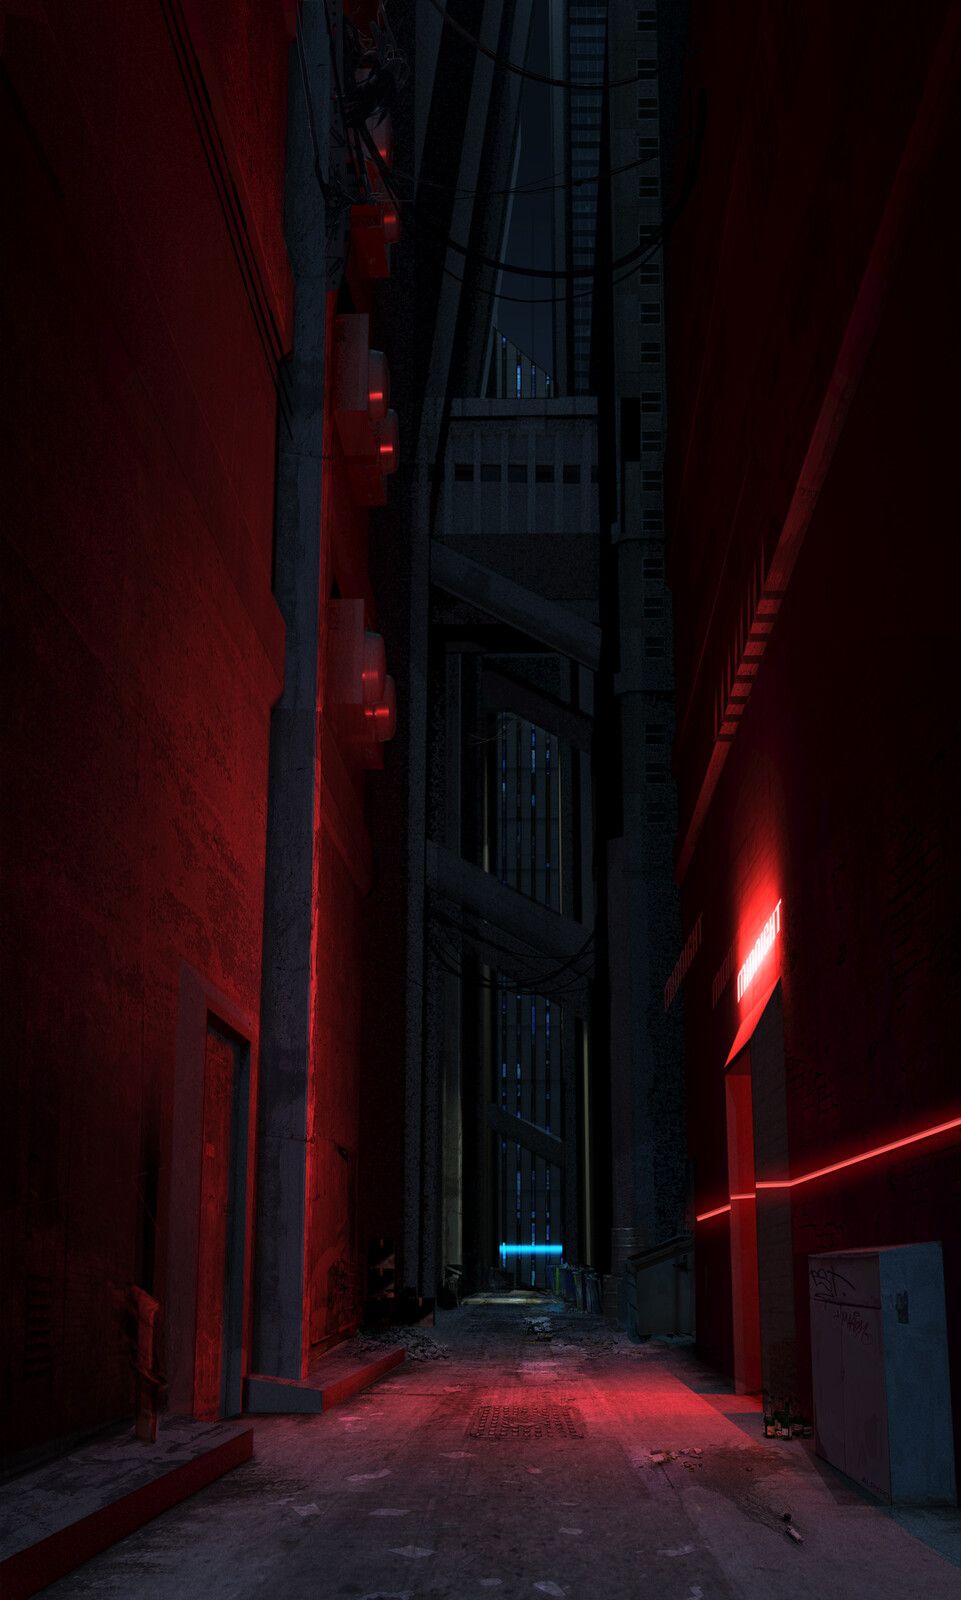 Cyberpunk back alley, Remy PAUL Images